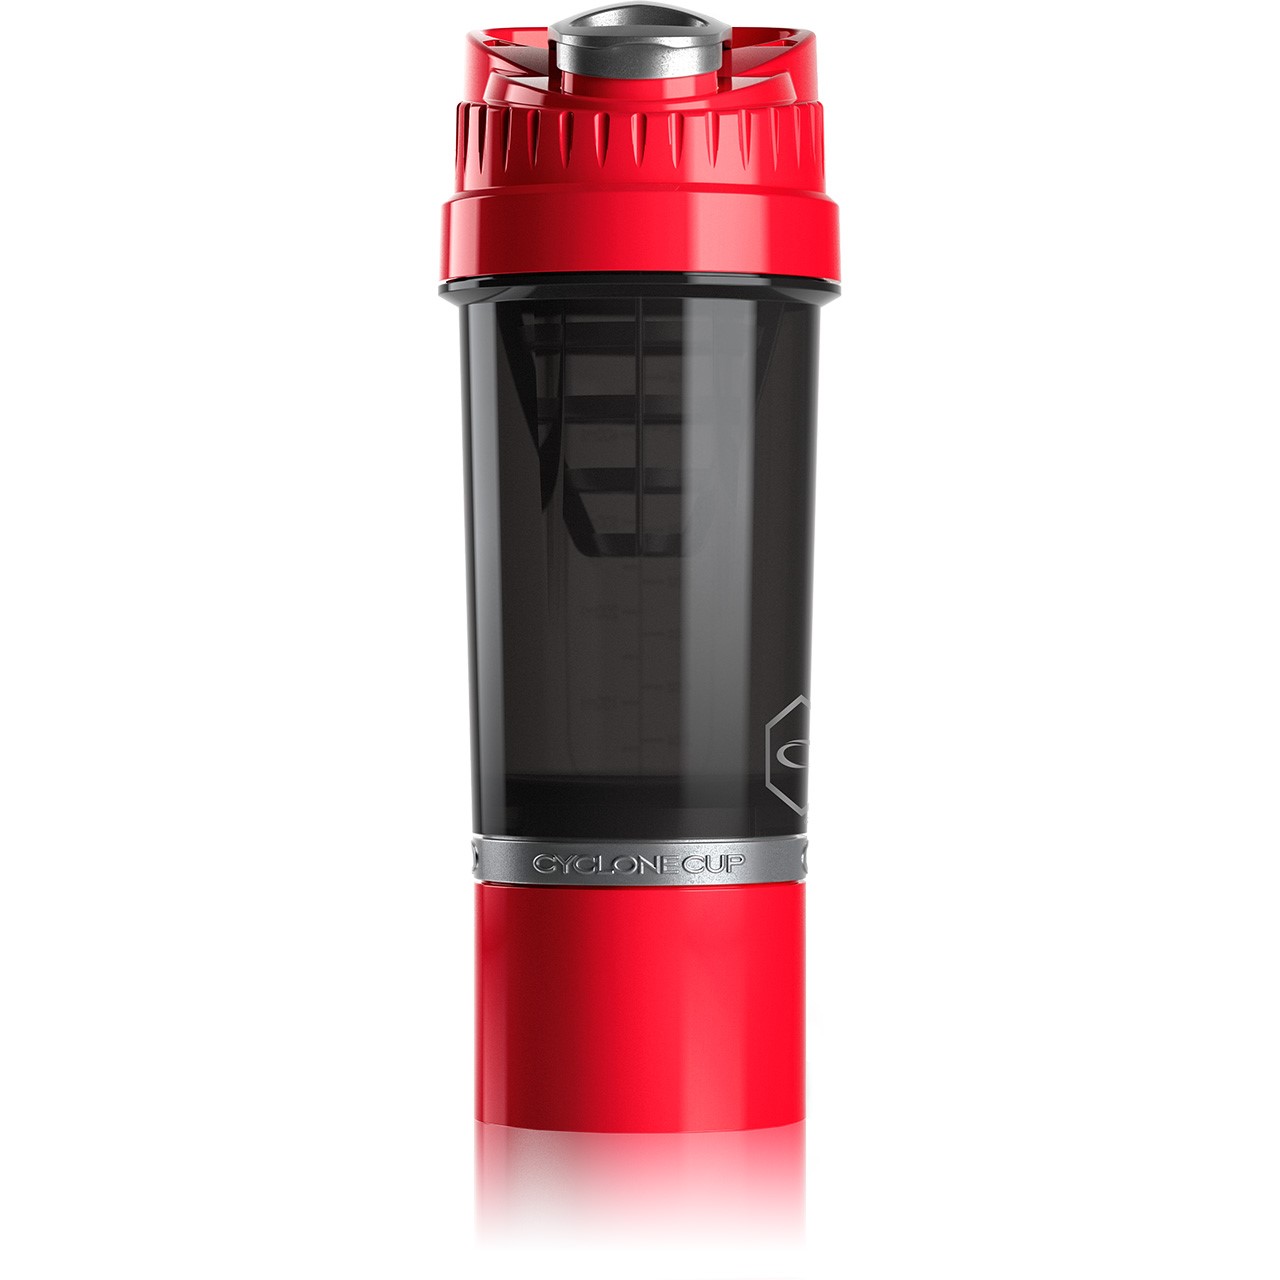 New Protein Shaker Cyclone Cup Rot 650 ml